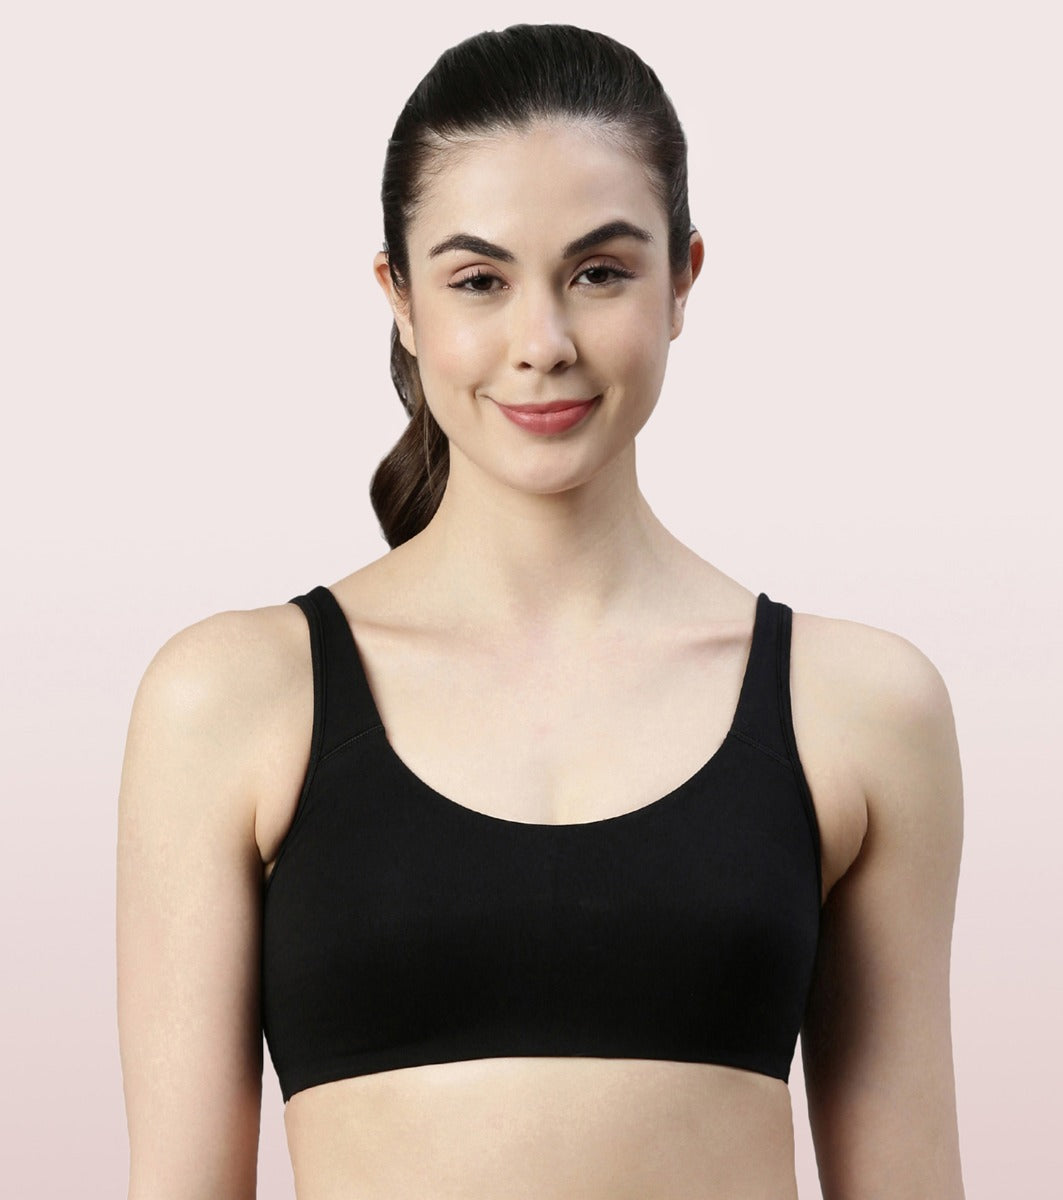 Enamor A057 Classic Cotton Sleep Bra Non-Padded Wirefree High